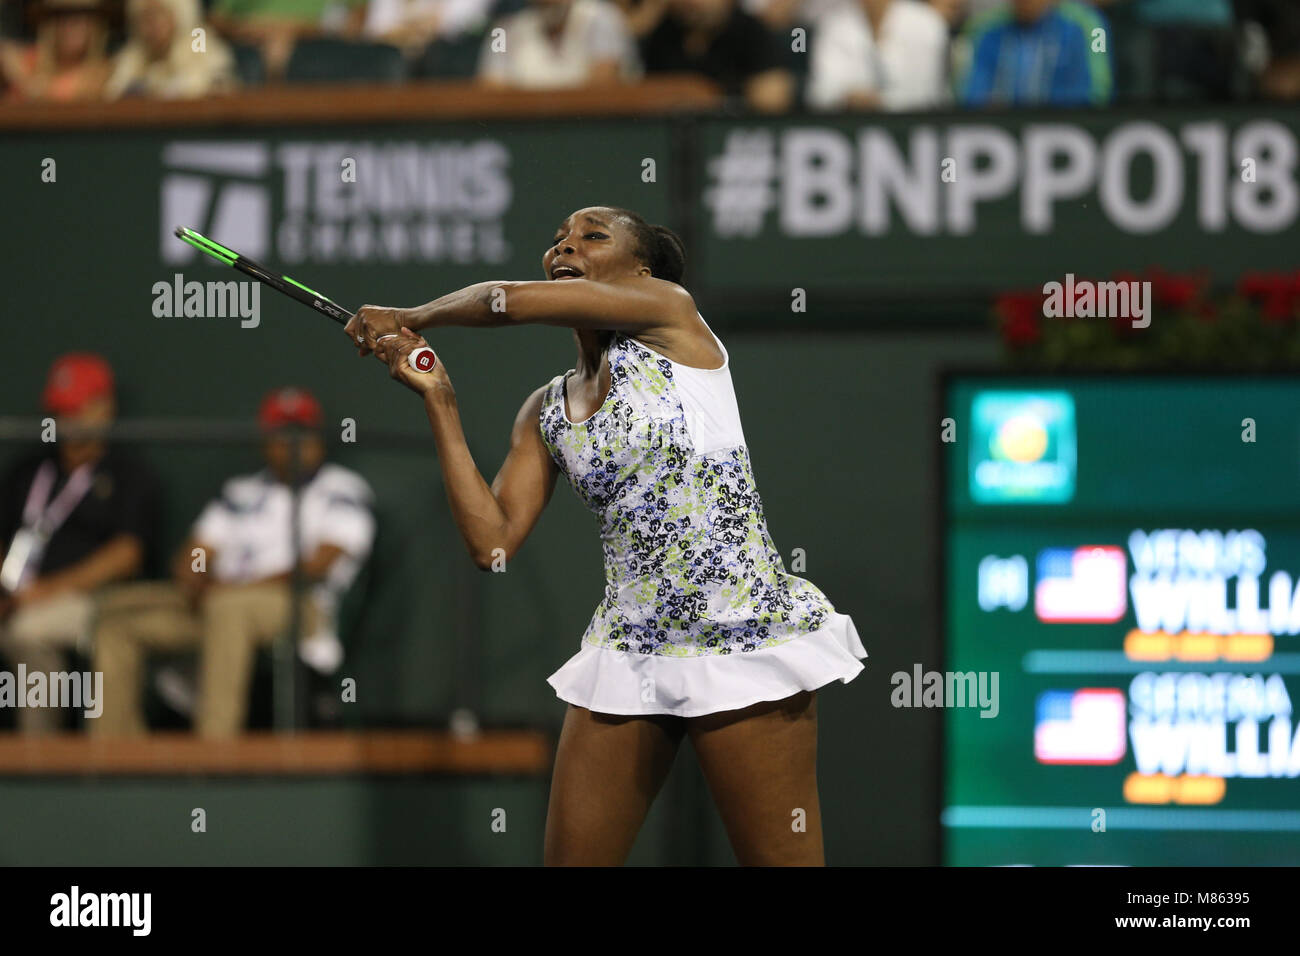 INDIAN WELLS, CA - MARCH 12: Venus Williams of United States defeats her sister Serena Williams during Day 8 of BNP Paribas Open on March 12, 2018 in Indian Wells, California.  People;  Venus Williams Stock Photo